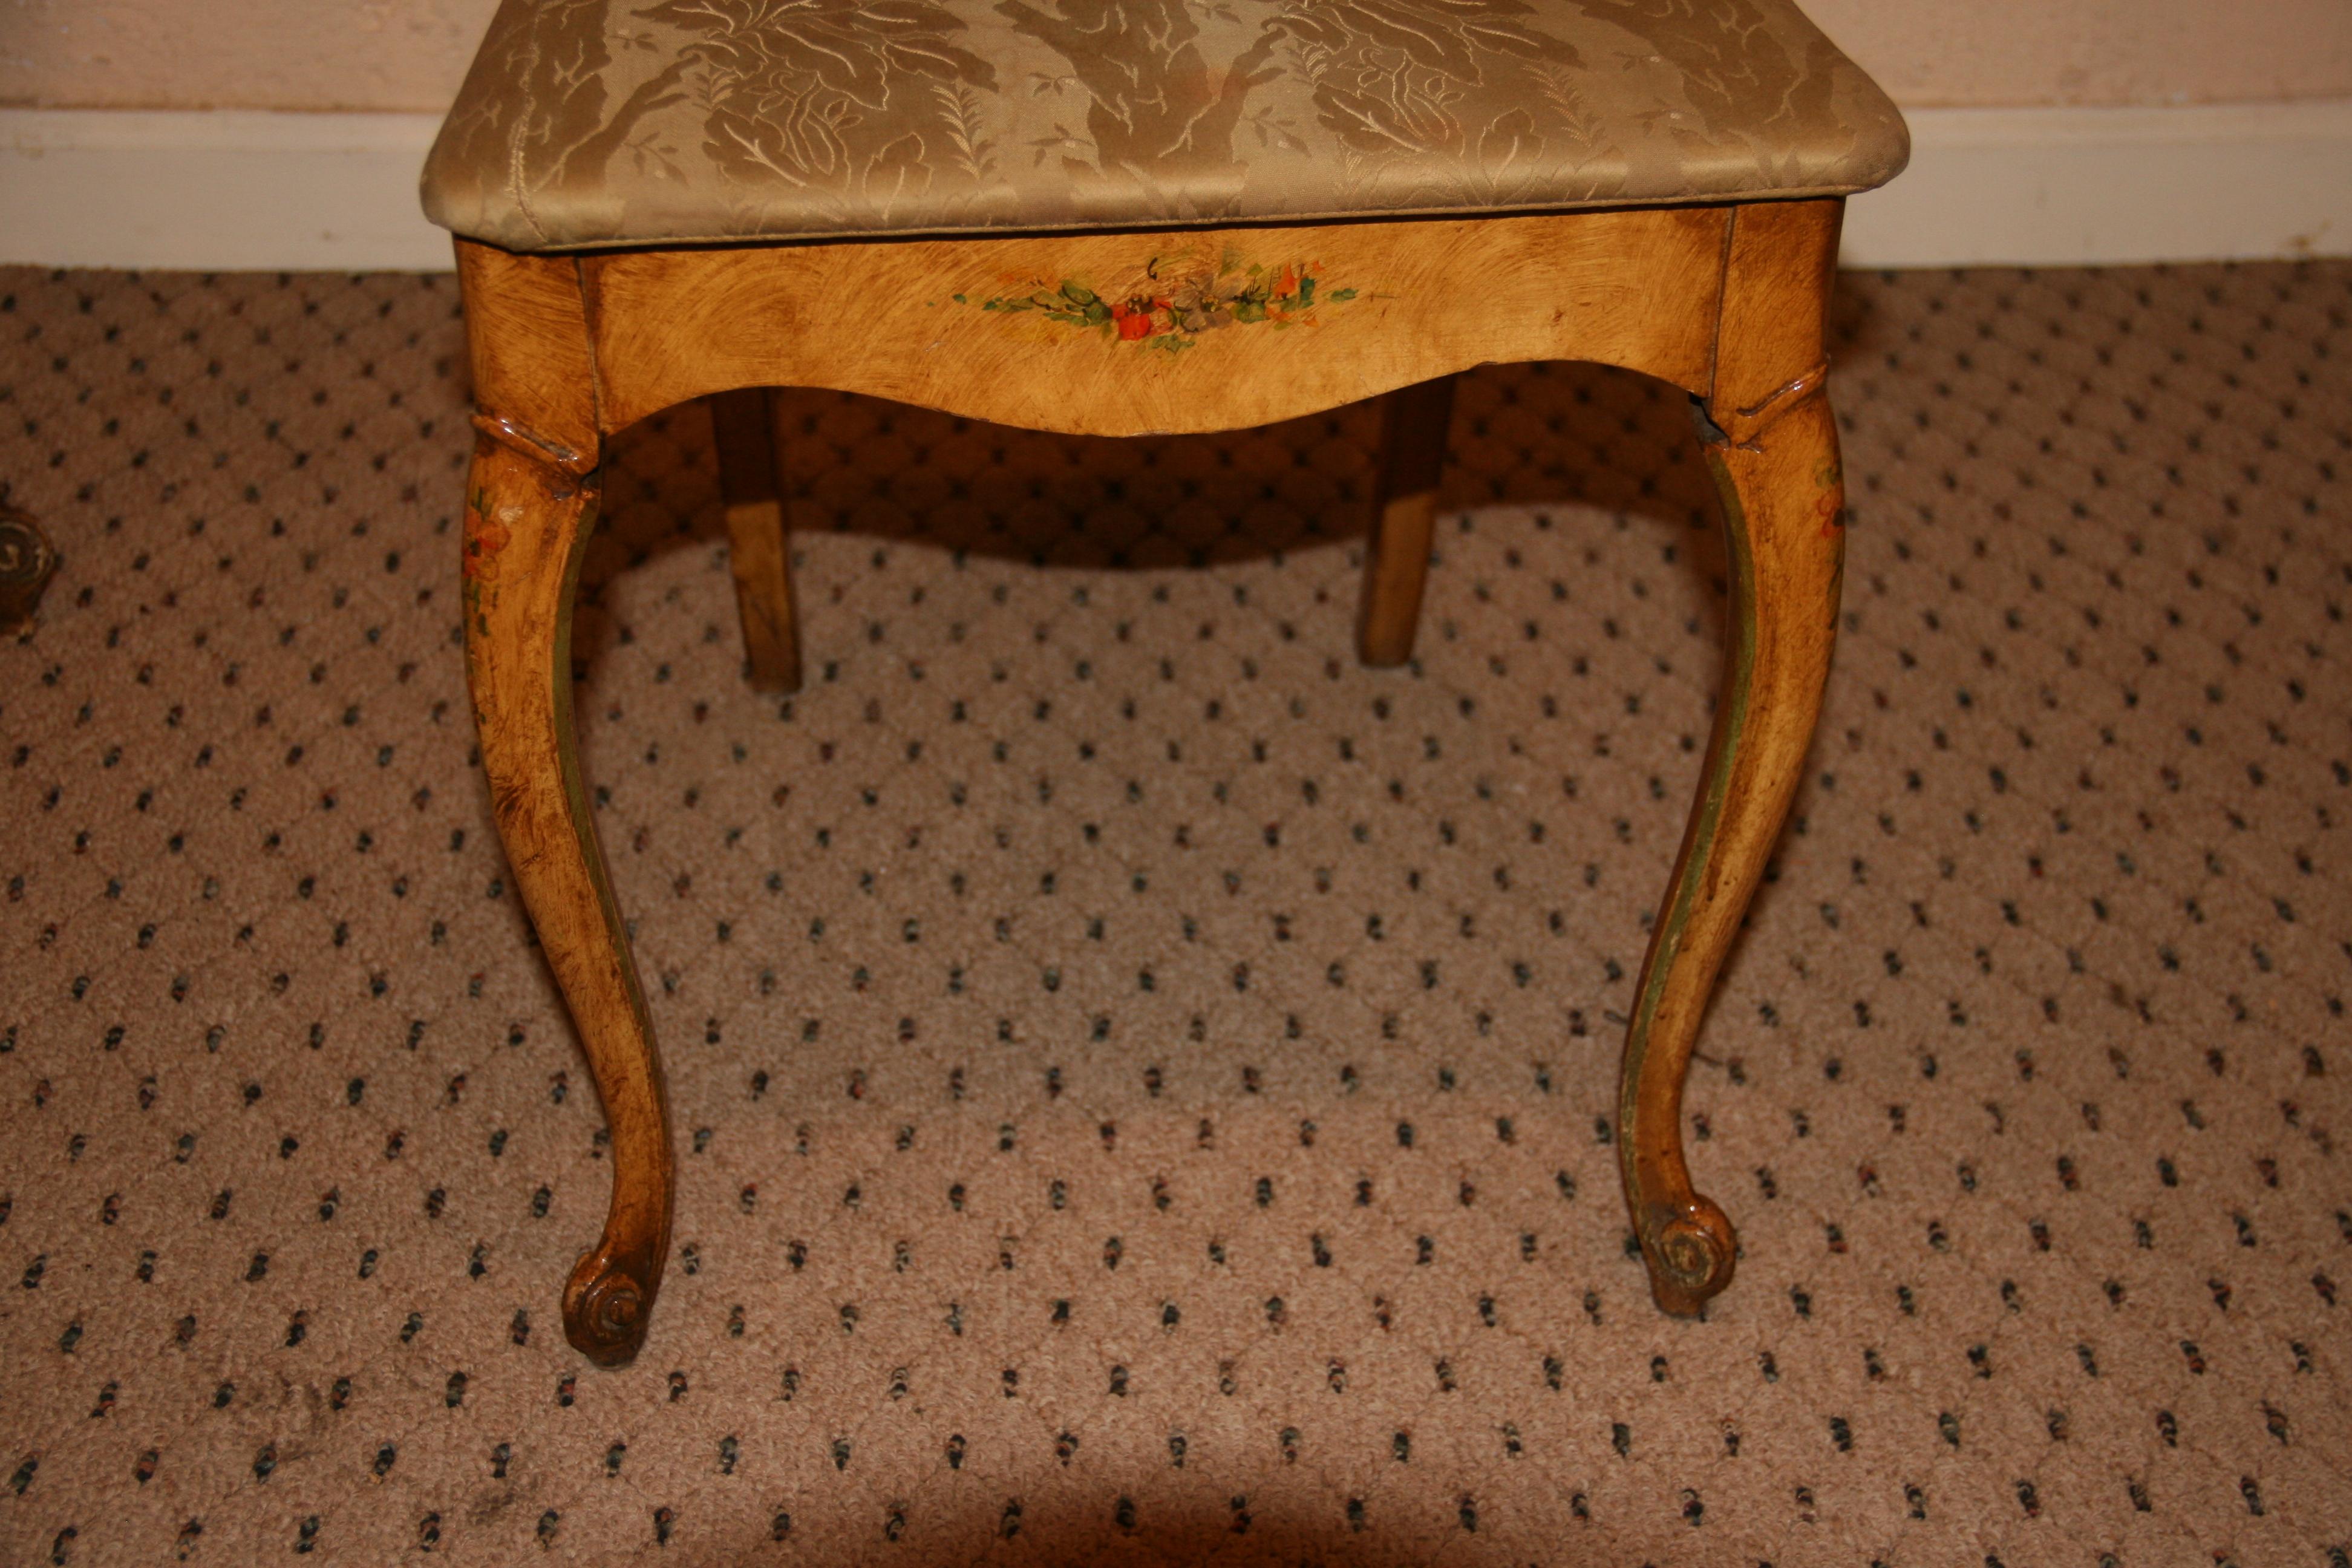 French Kidney Shaped Hand Painted Desk and Chair 1920's For Sale 12